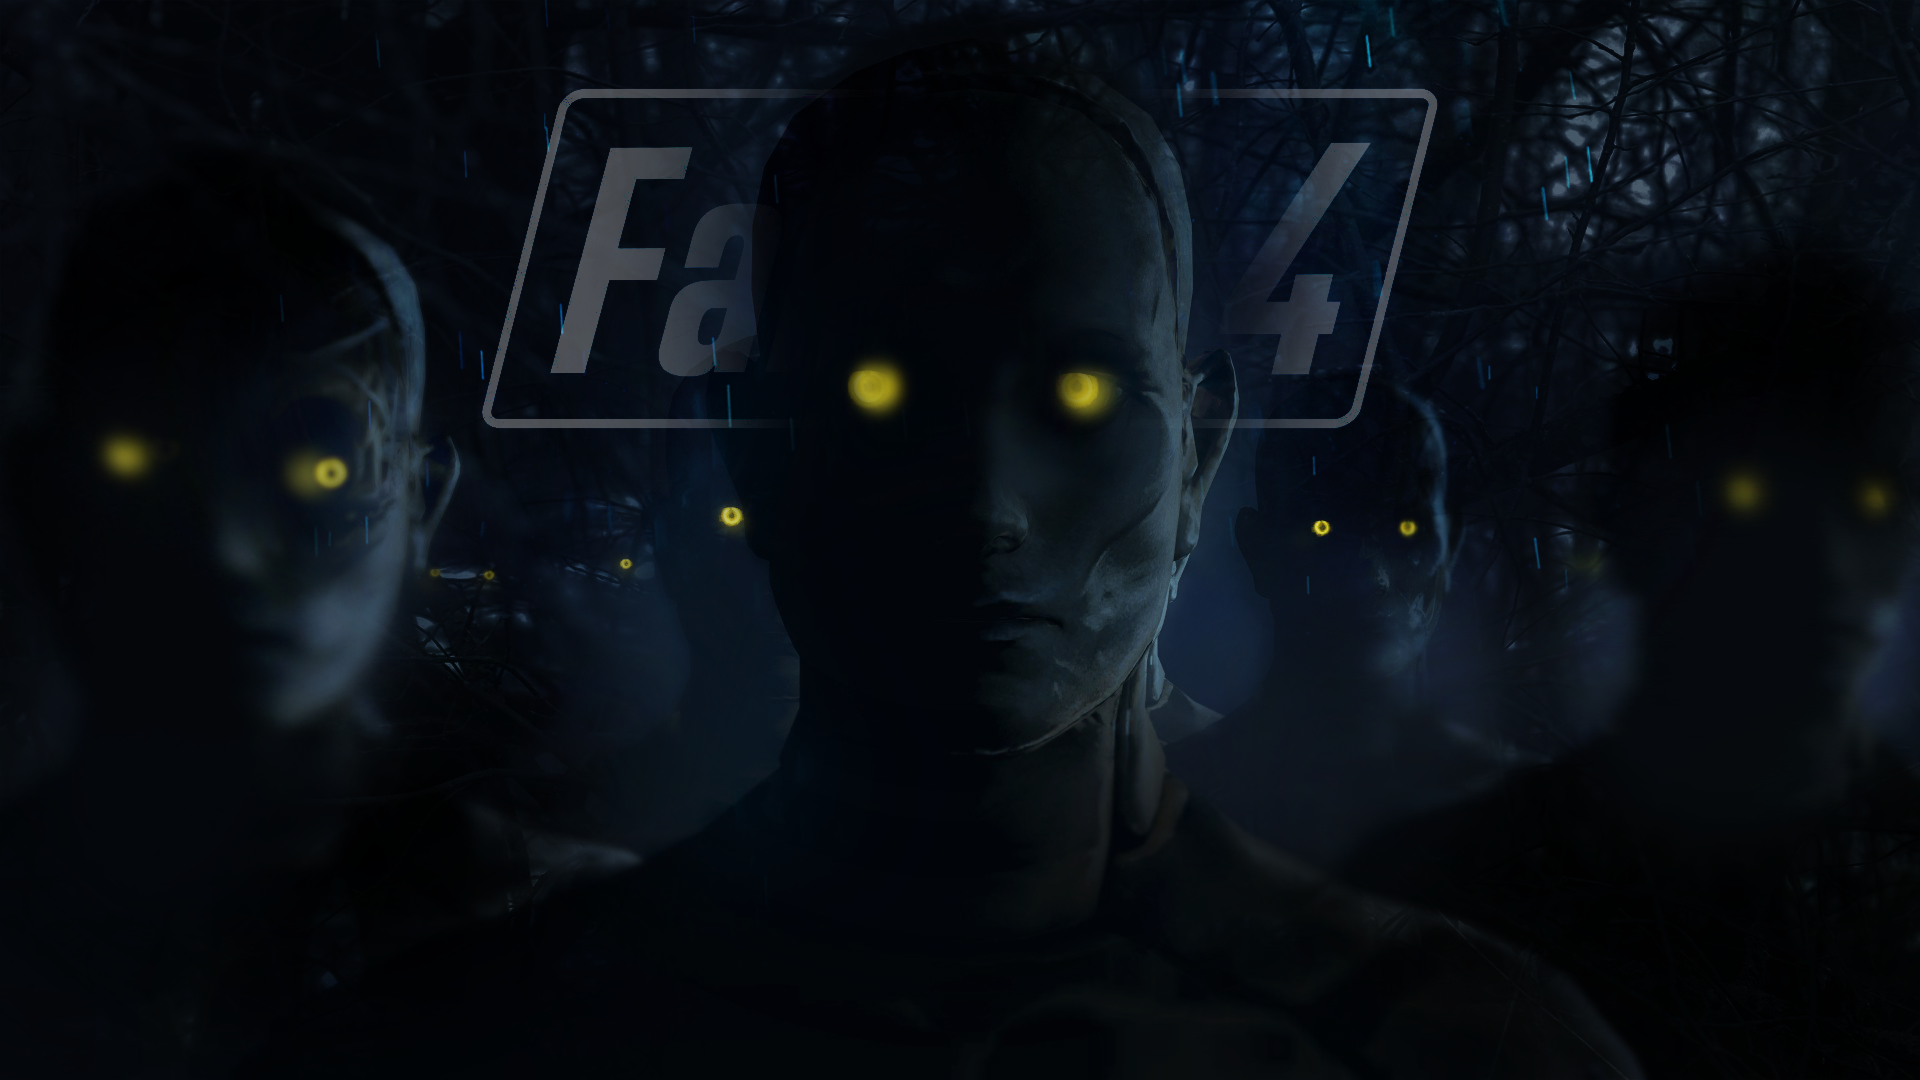 Fallout 4 Bethesda Softworks Glowing Eyes Spooky Video Games Synth 1920x1080